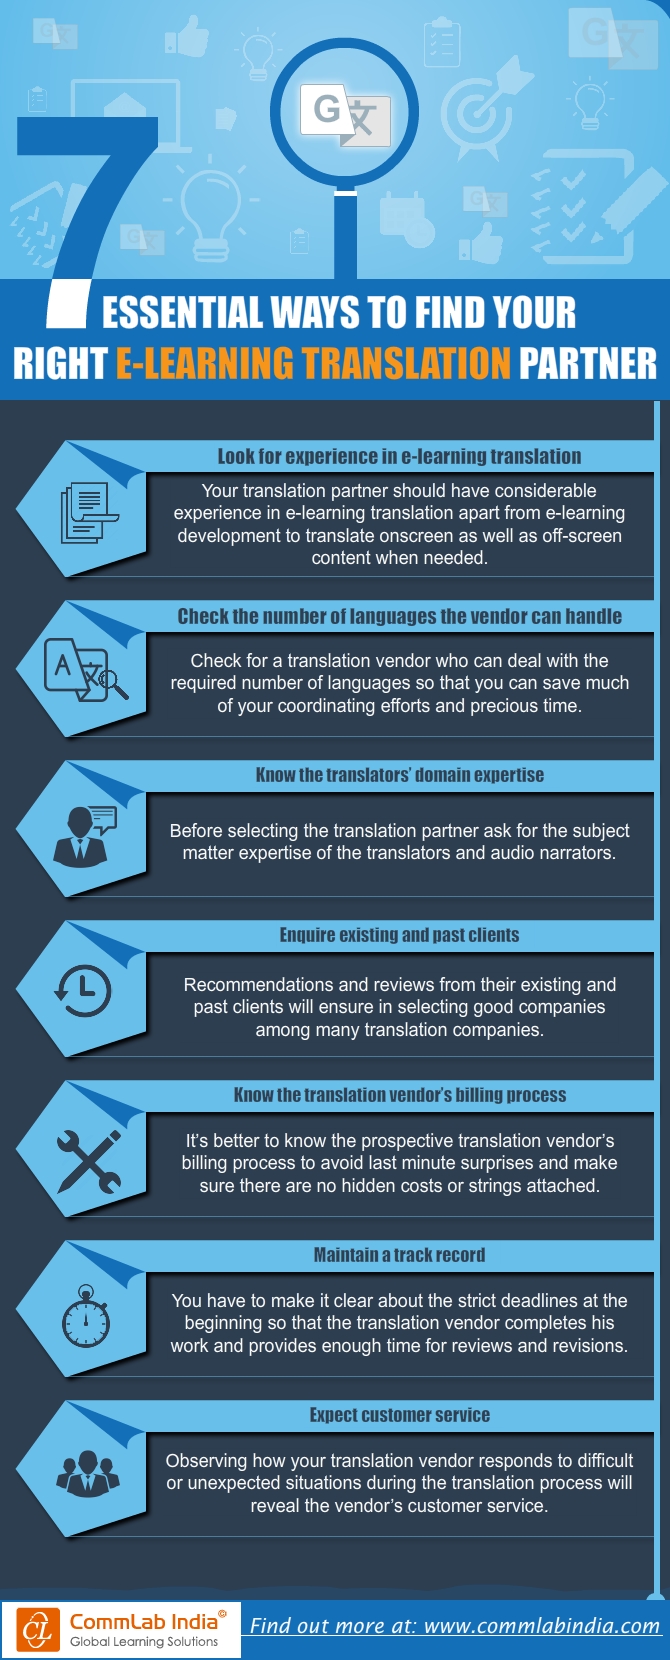 7 Essential Ways to Find Your Right E-learning Translation Partner [Infographic]